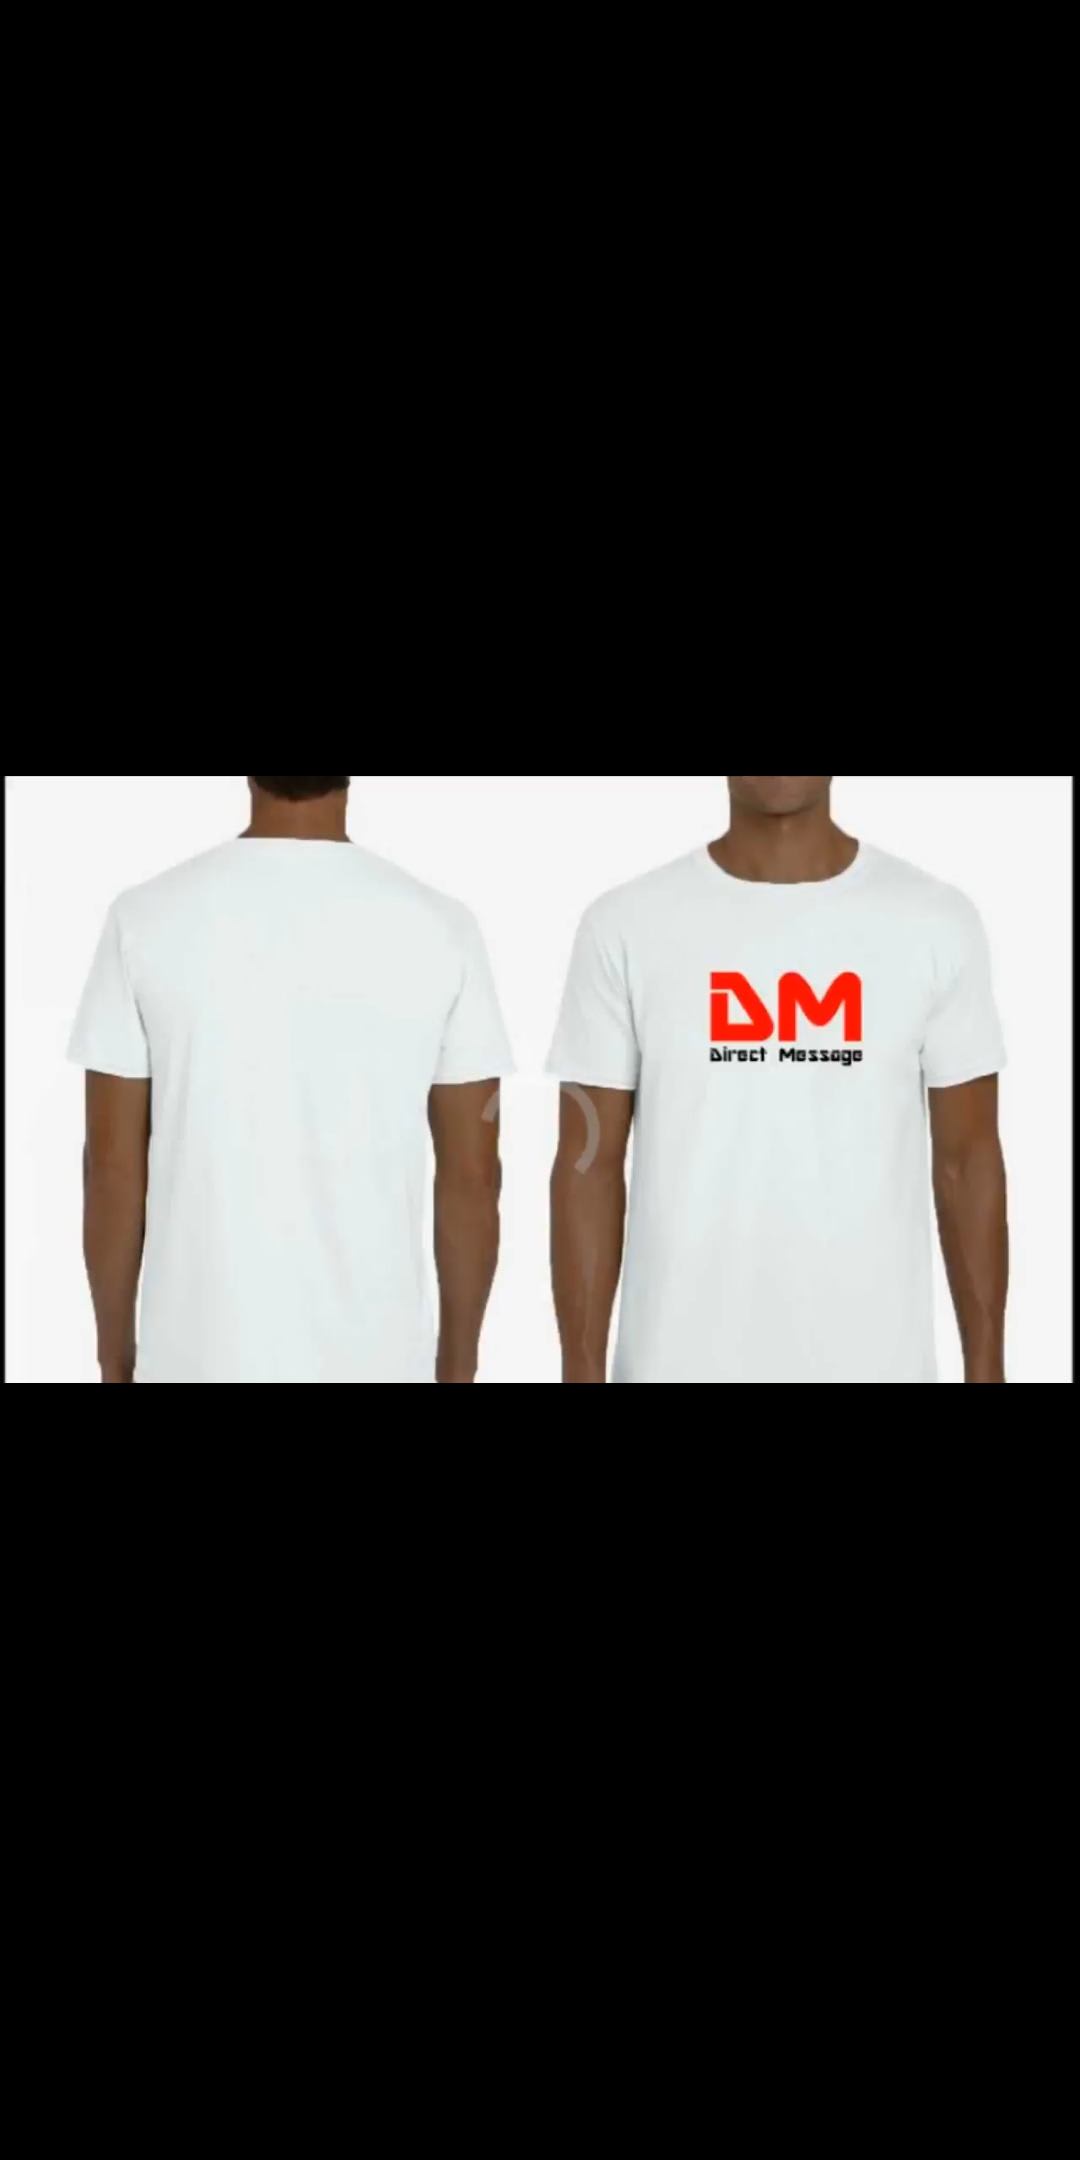 Direct Message Me clothing